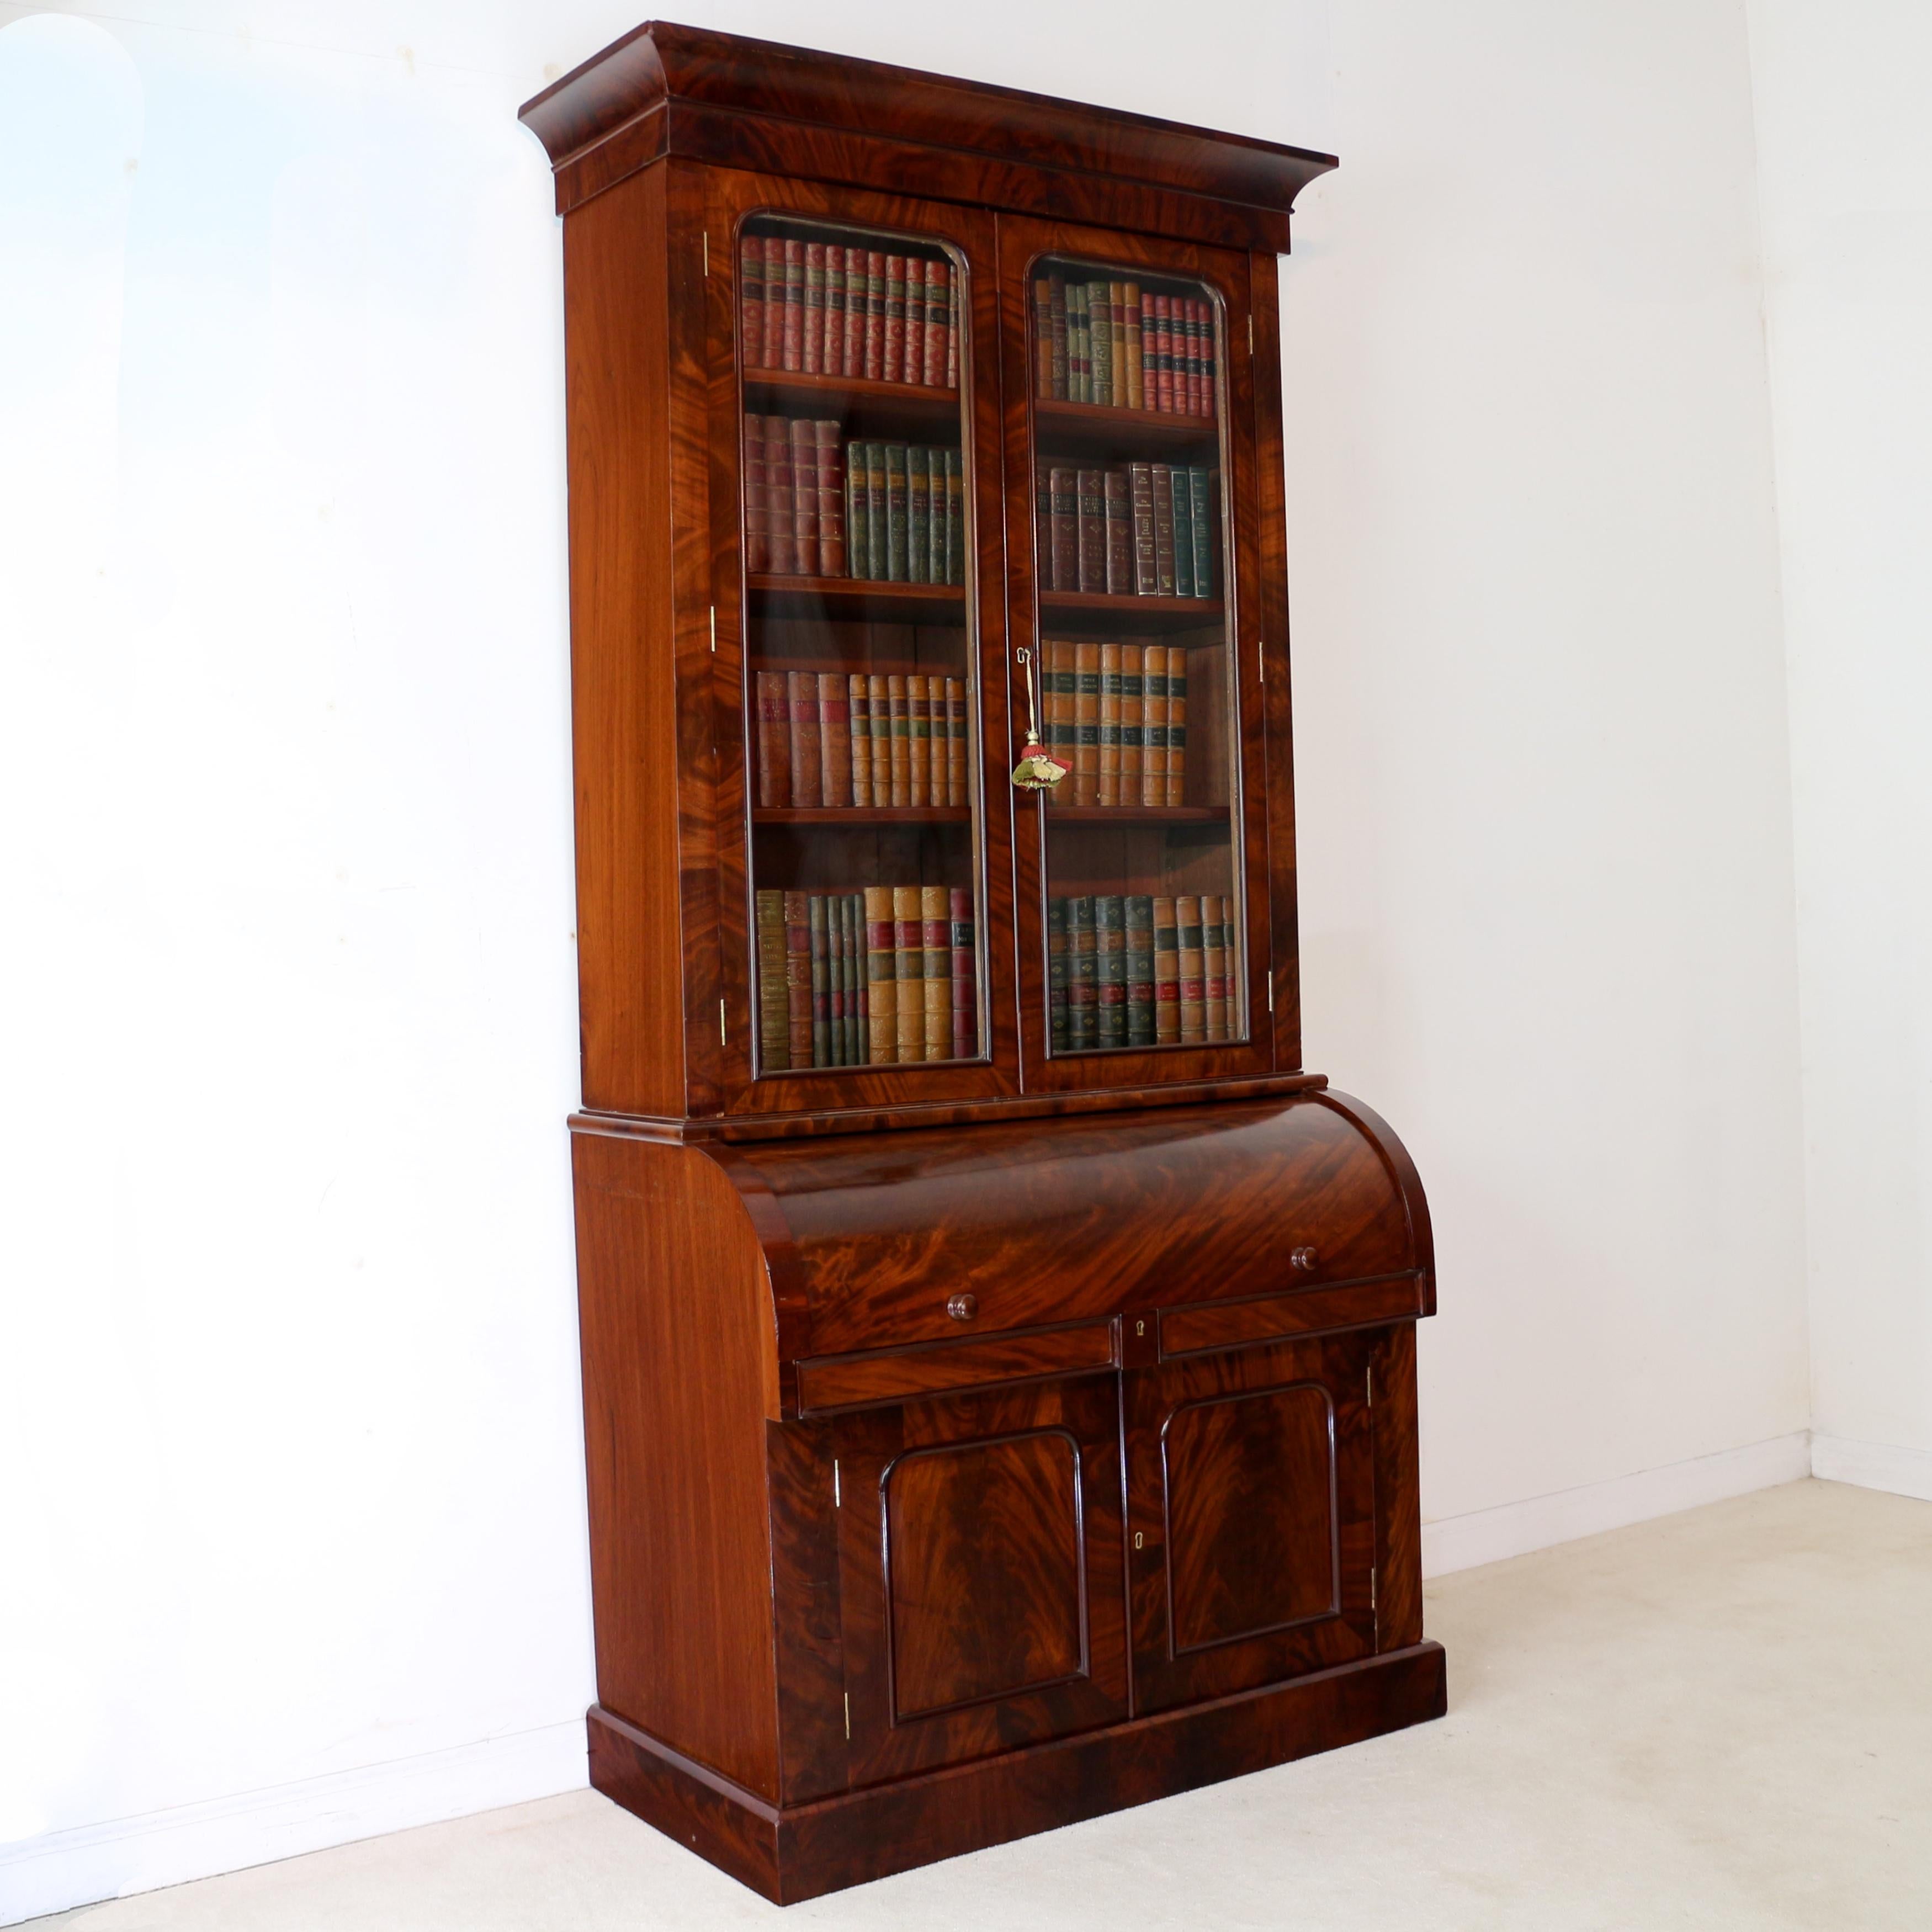 A super William IV/early Victorian cylinder bookcase in beautifully figured flame mahogany, with a rectangular moulded cornice above two glazed doors enclosing adjustable shelves, the projecting base with a revolving cylinder door concealing a